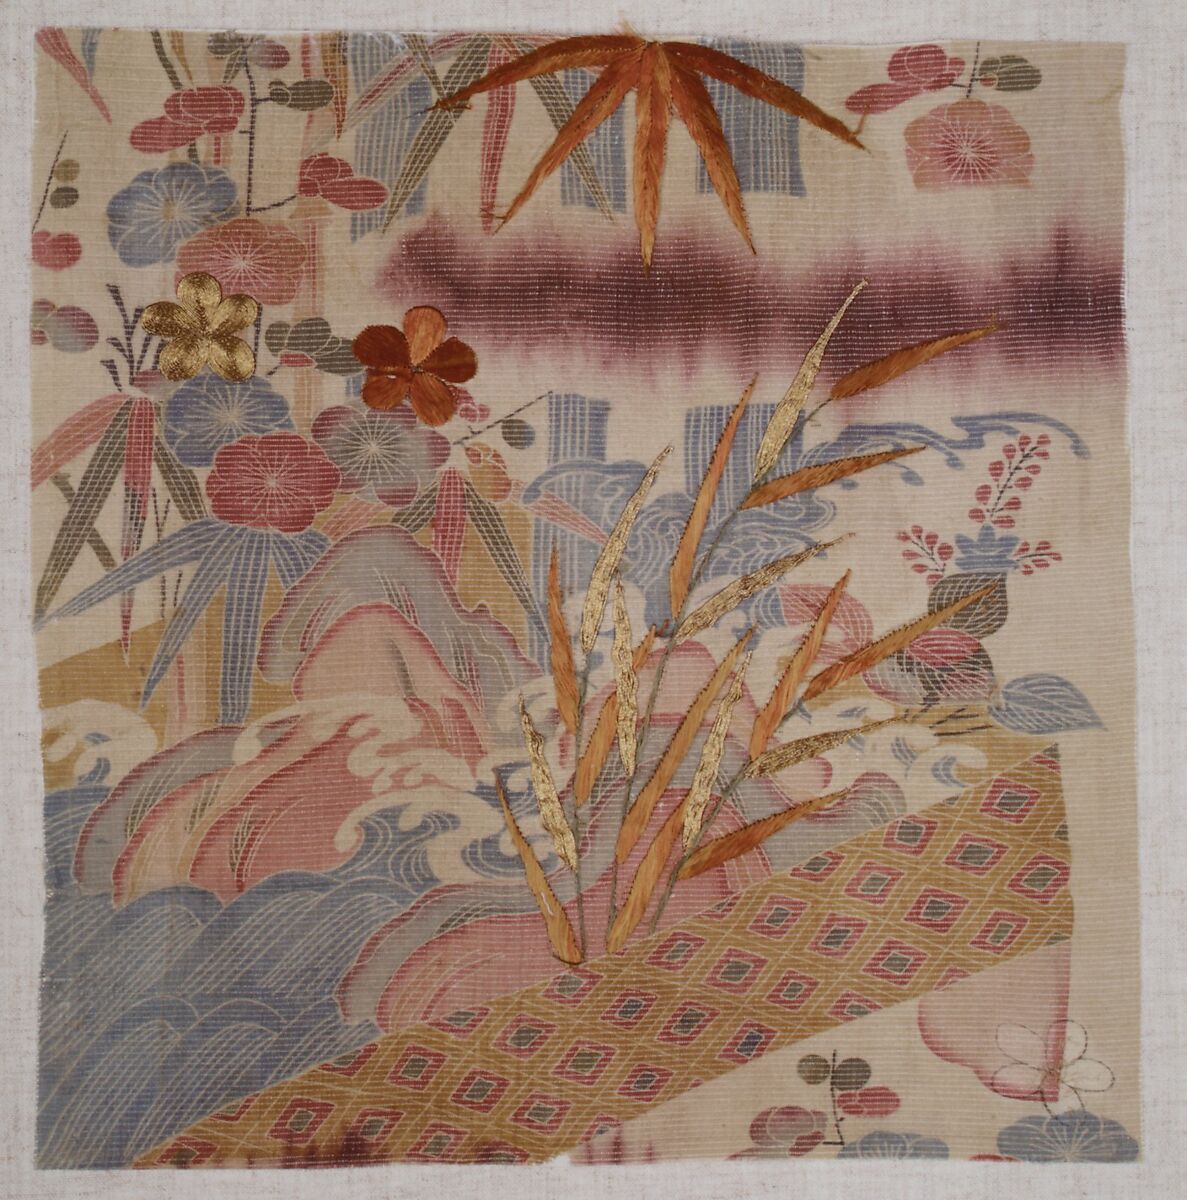 Fragment of an Unlined Kosode (Hitoe), Ground of dye-patterned (somewake) white and purple gauze (ro), Japan 